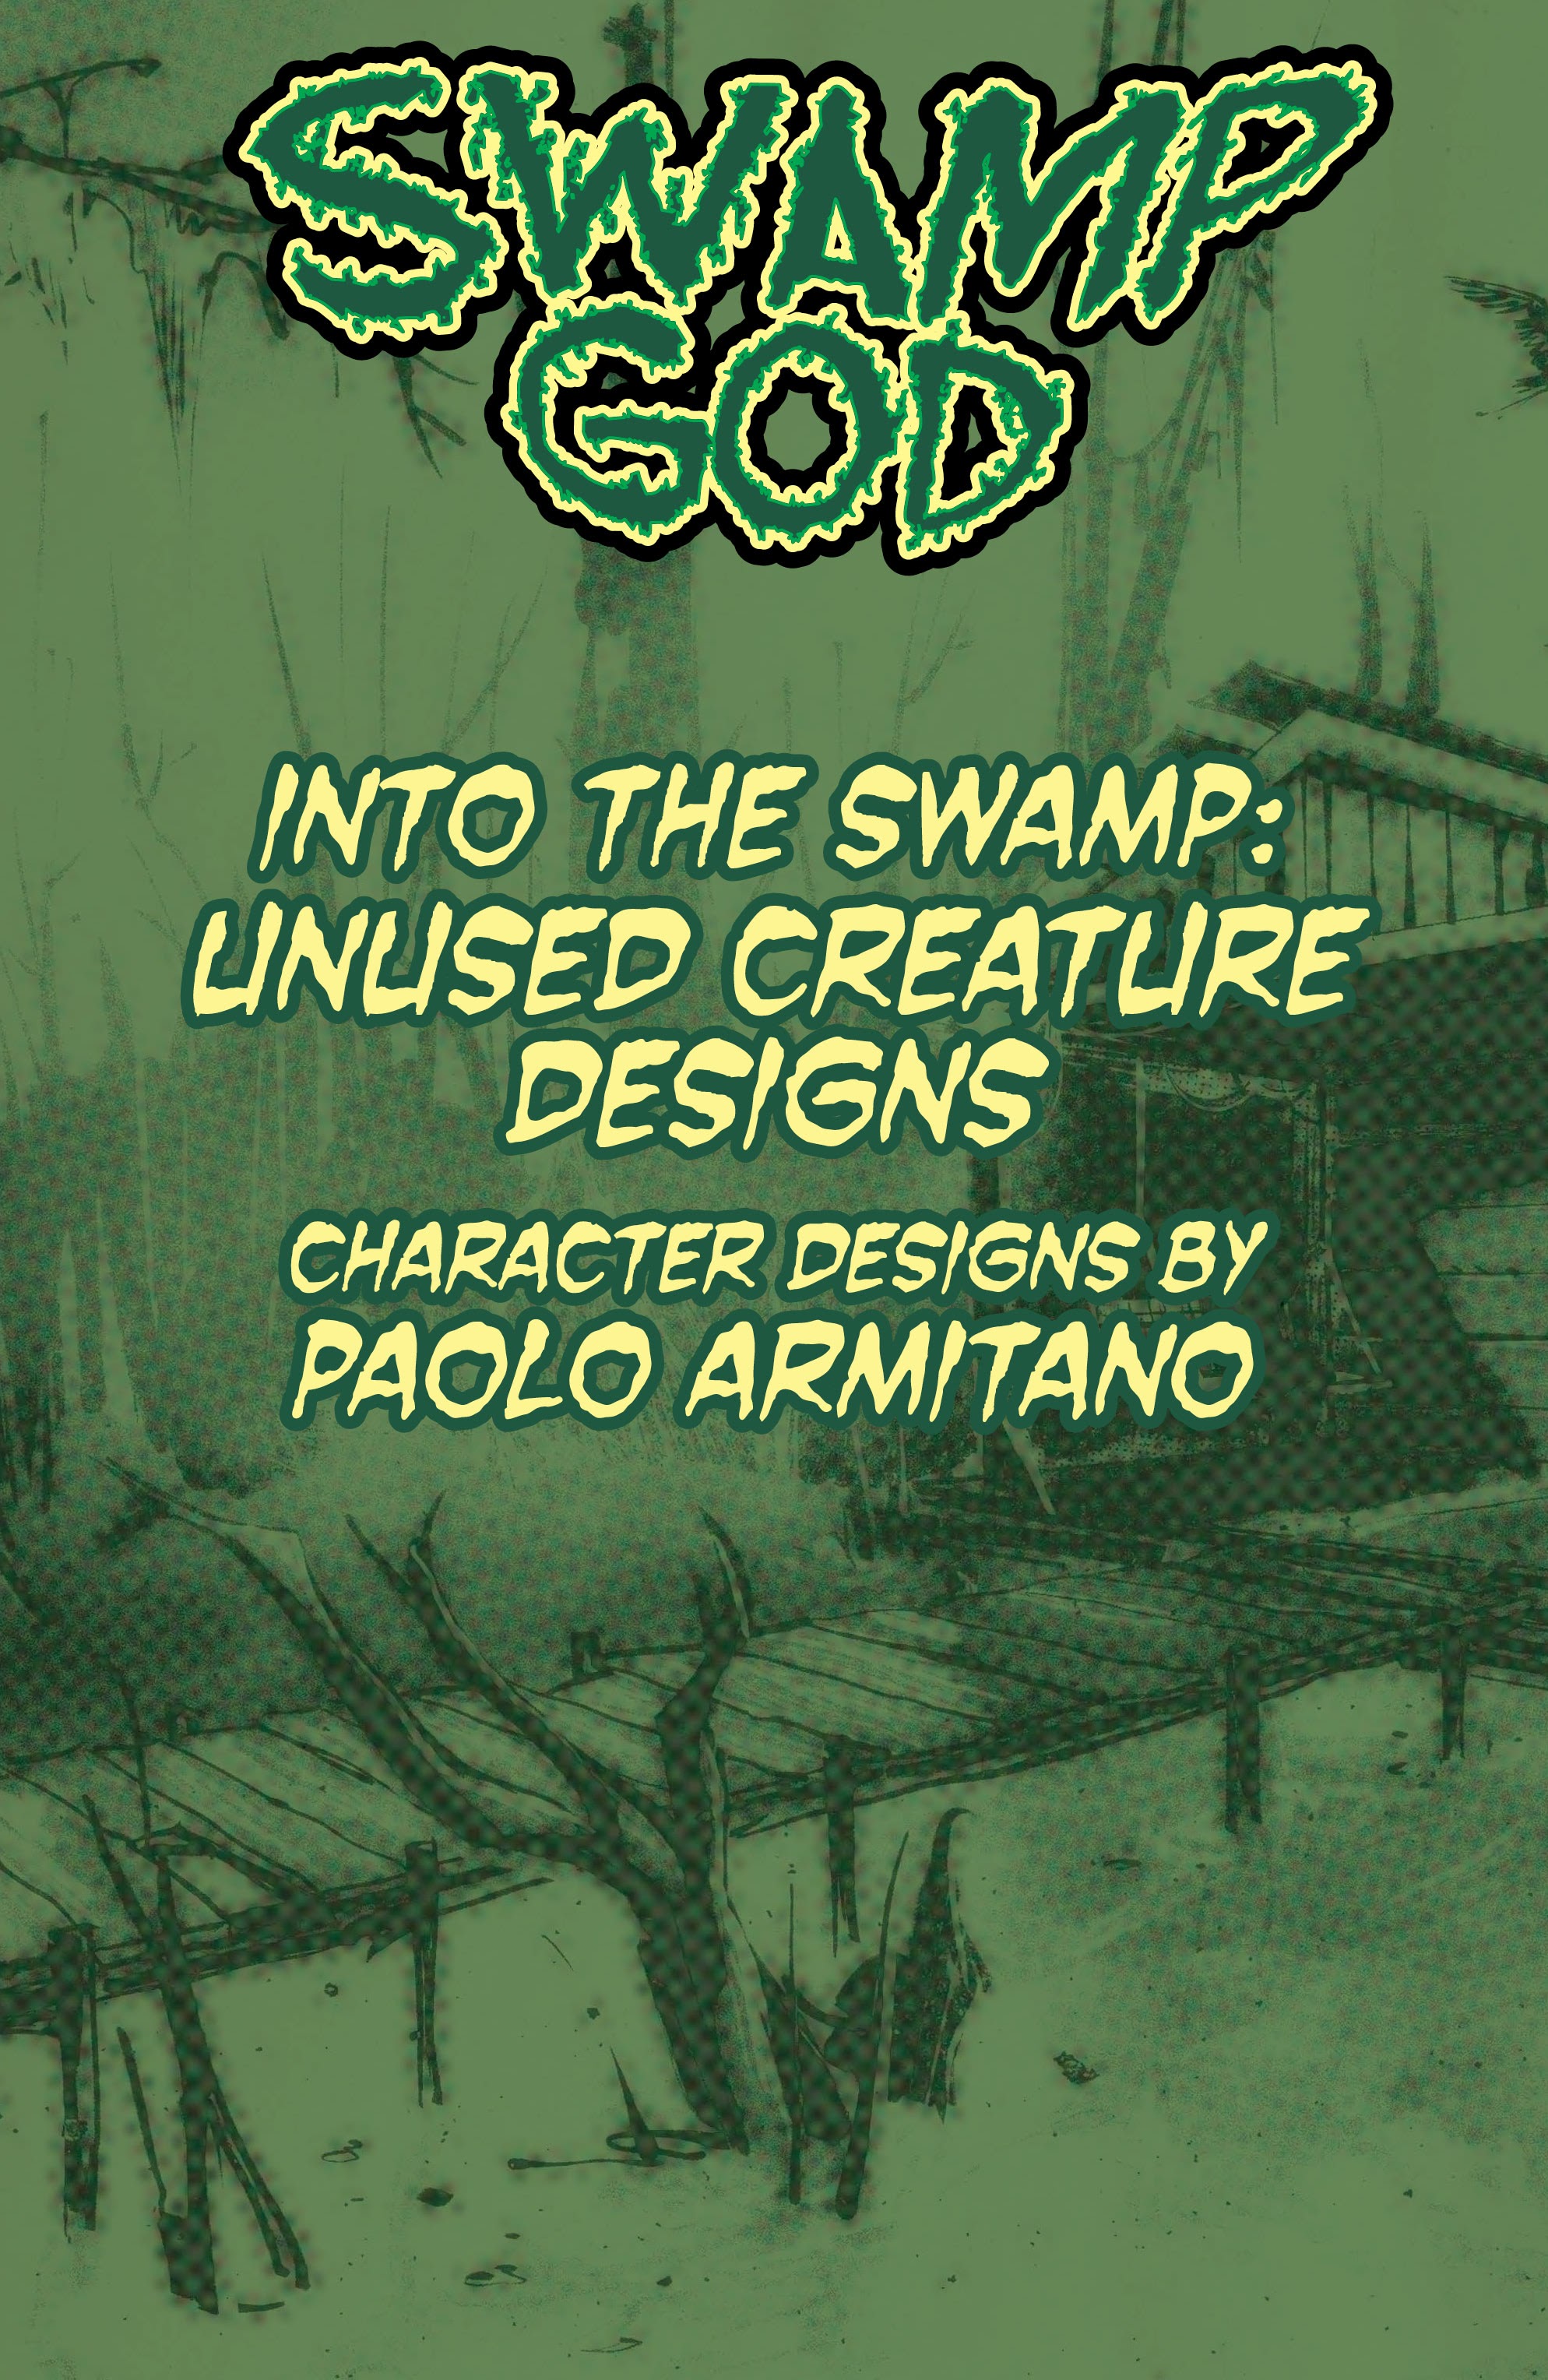 Read online Swamp God comic -  Issue #2 - 17